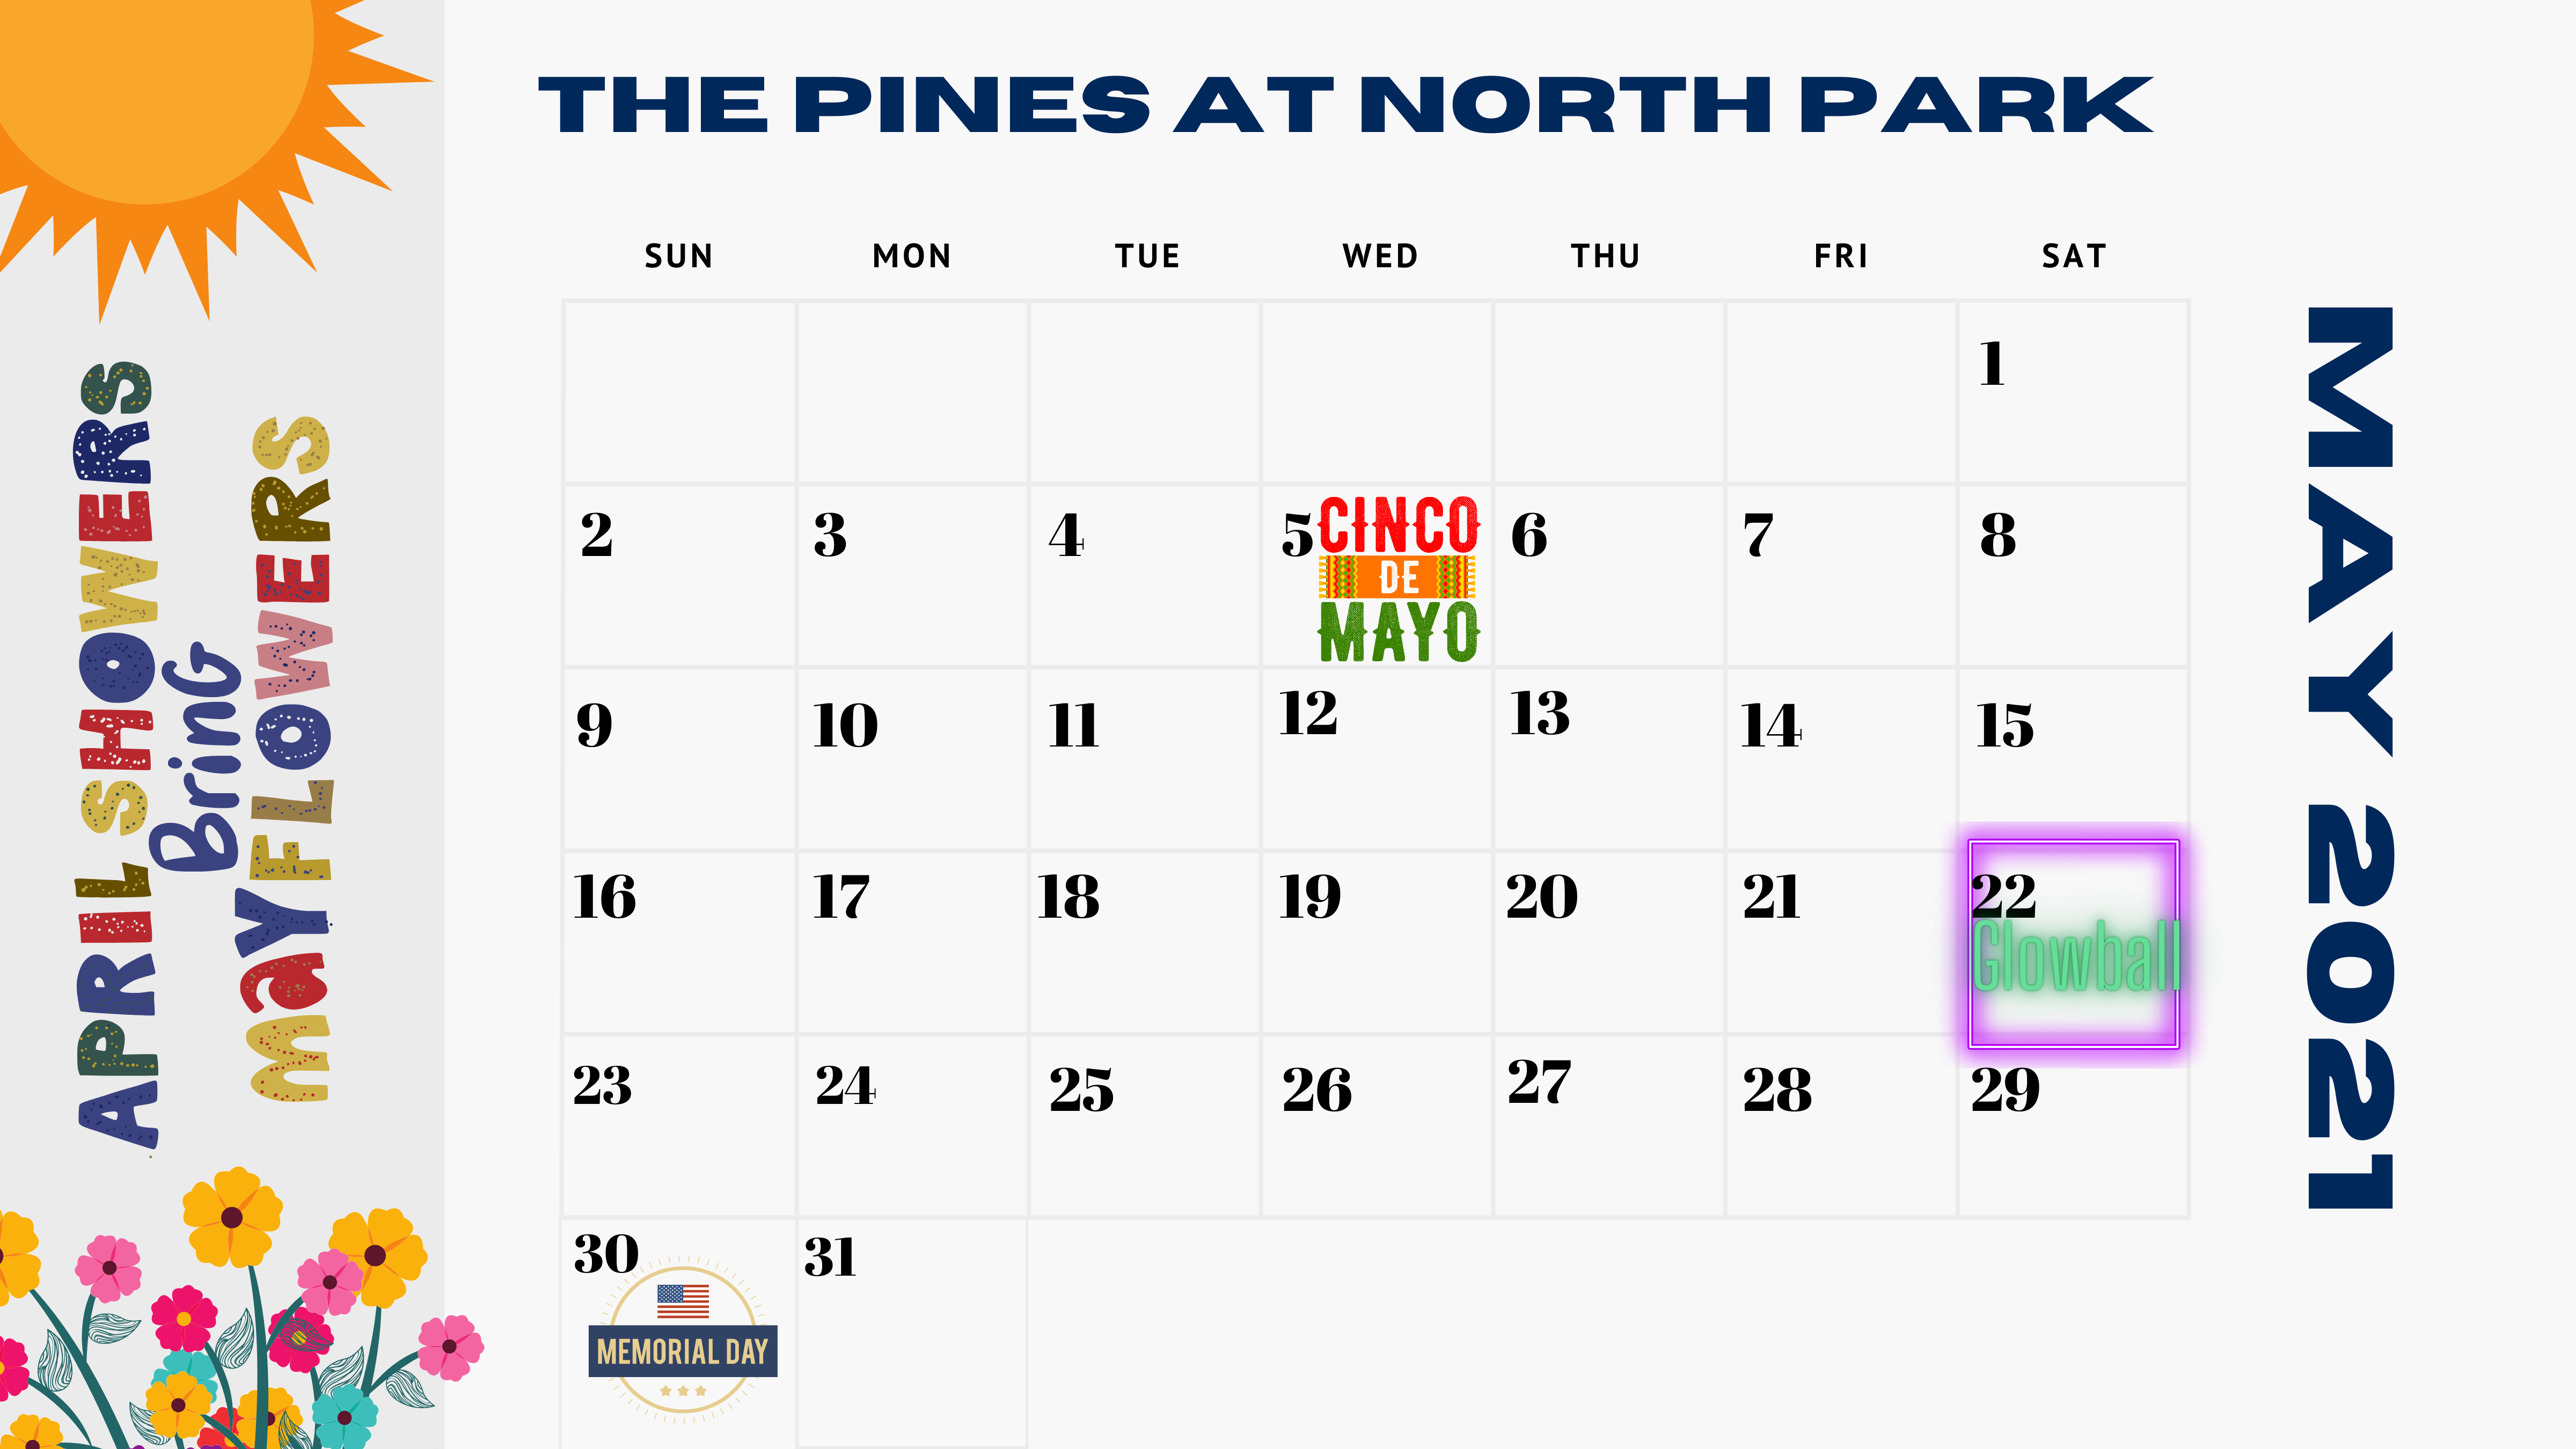 Event Calendar The Pines at North Park